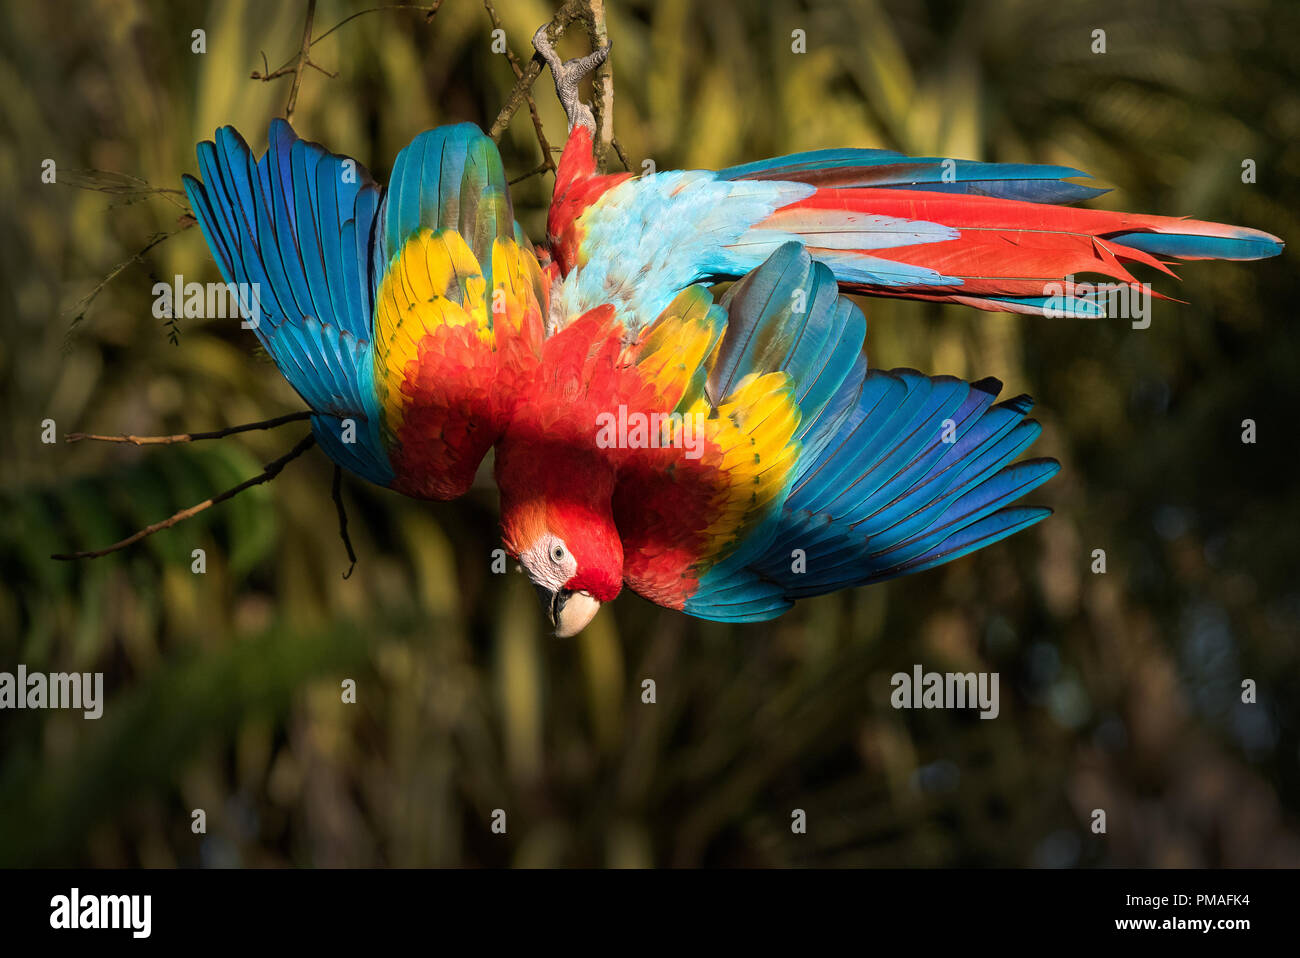 An scarlet macaw showing all colors and feathers. Photograph taken in Costa Rica Stock Photo